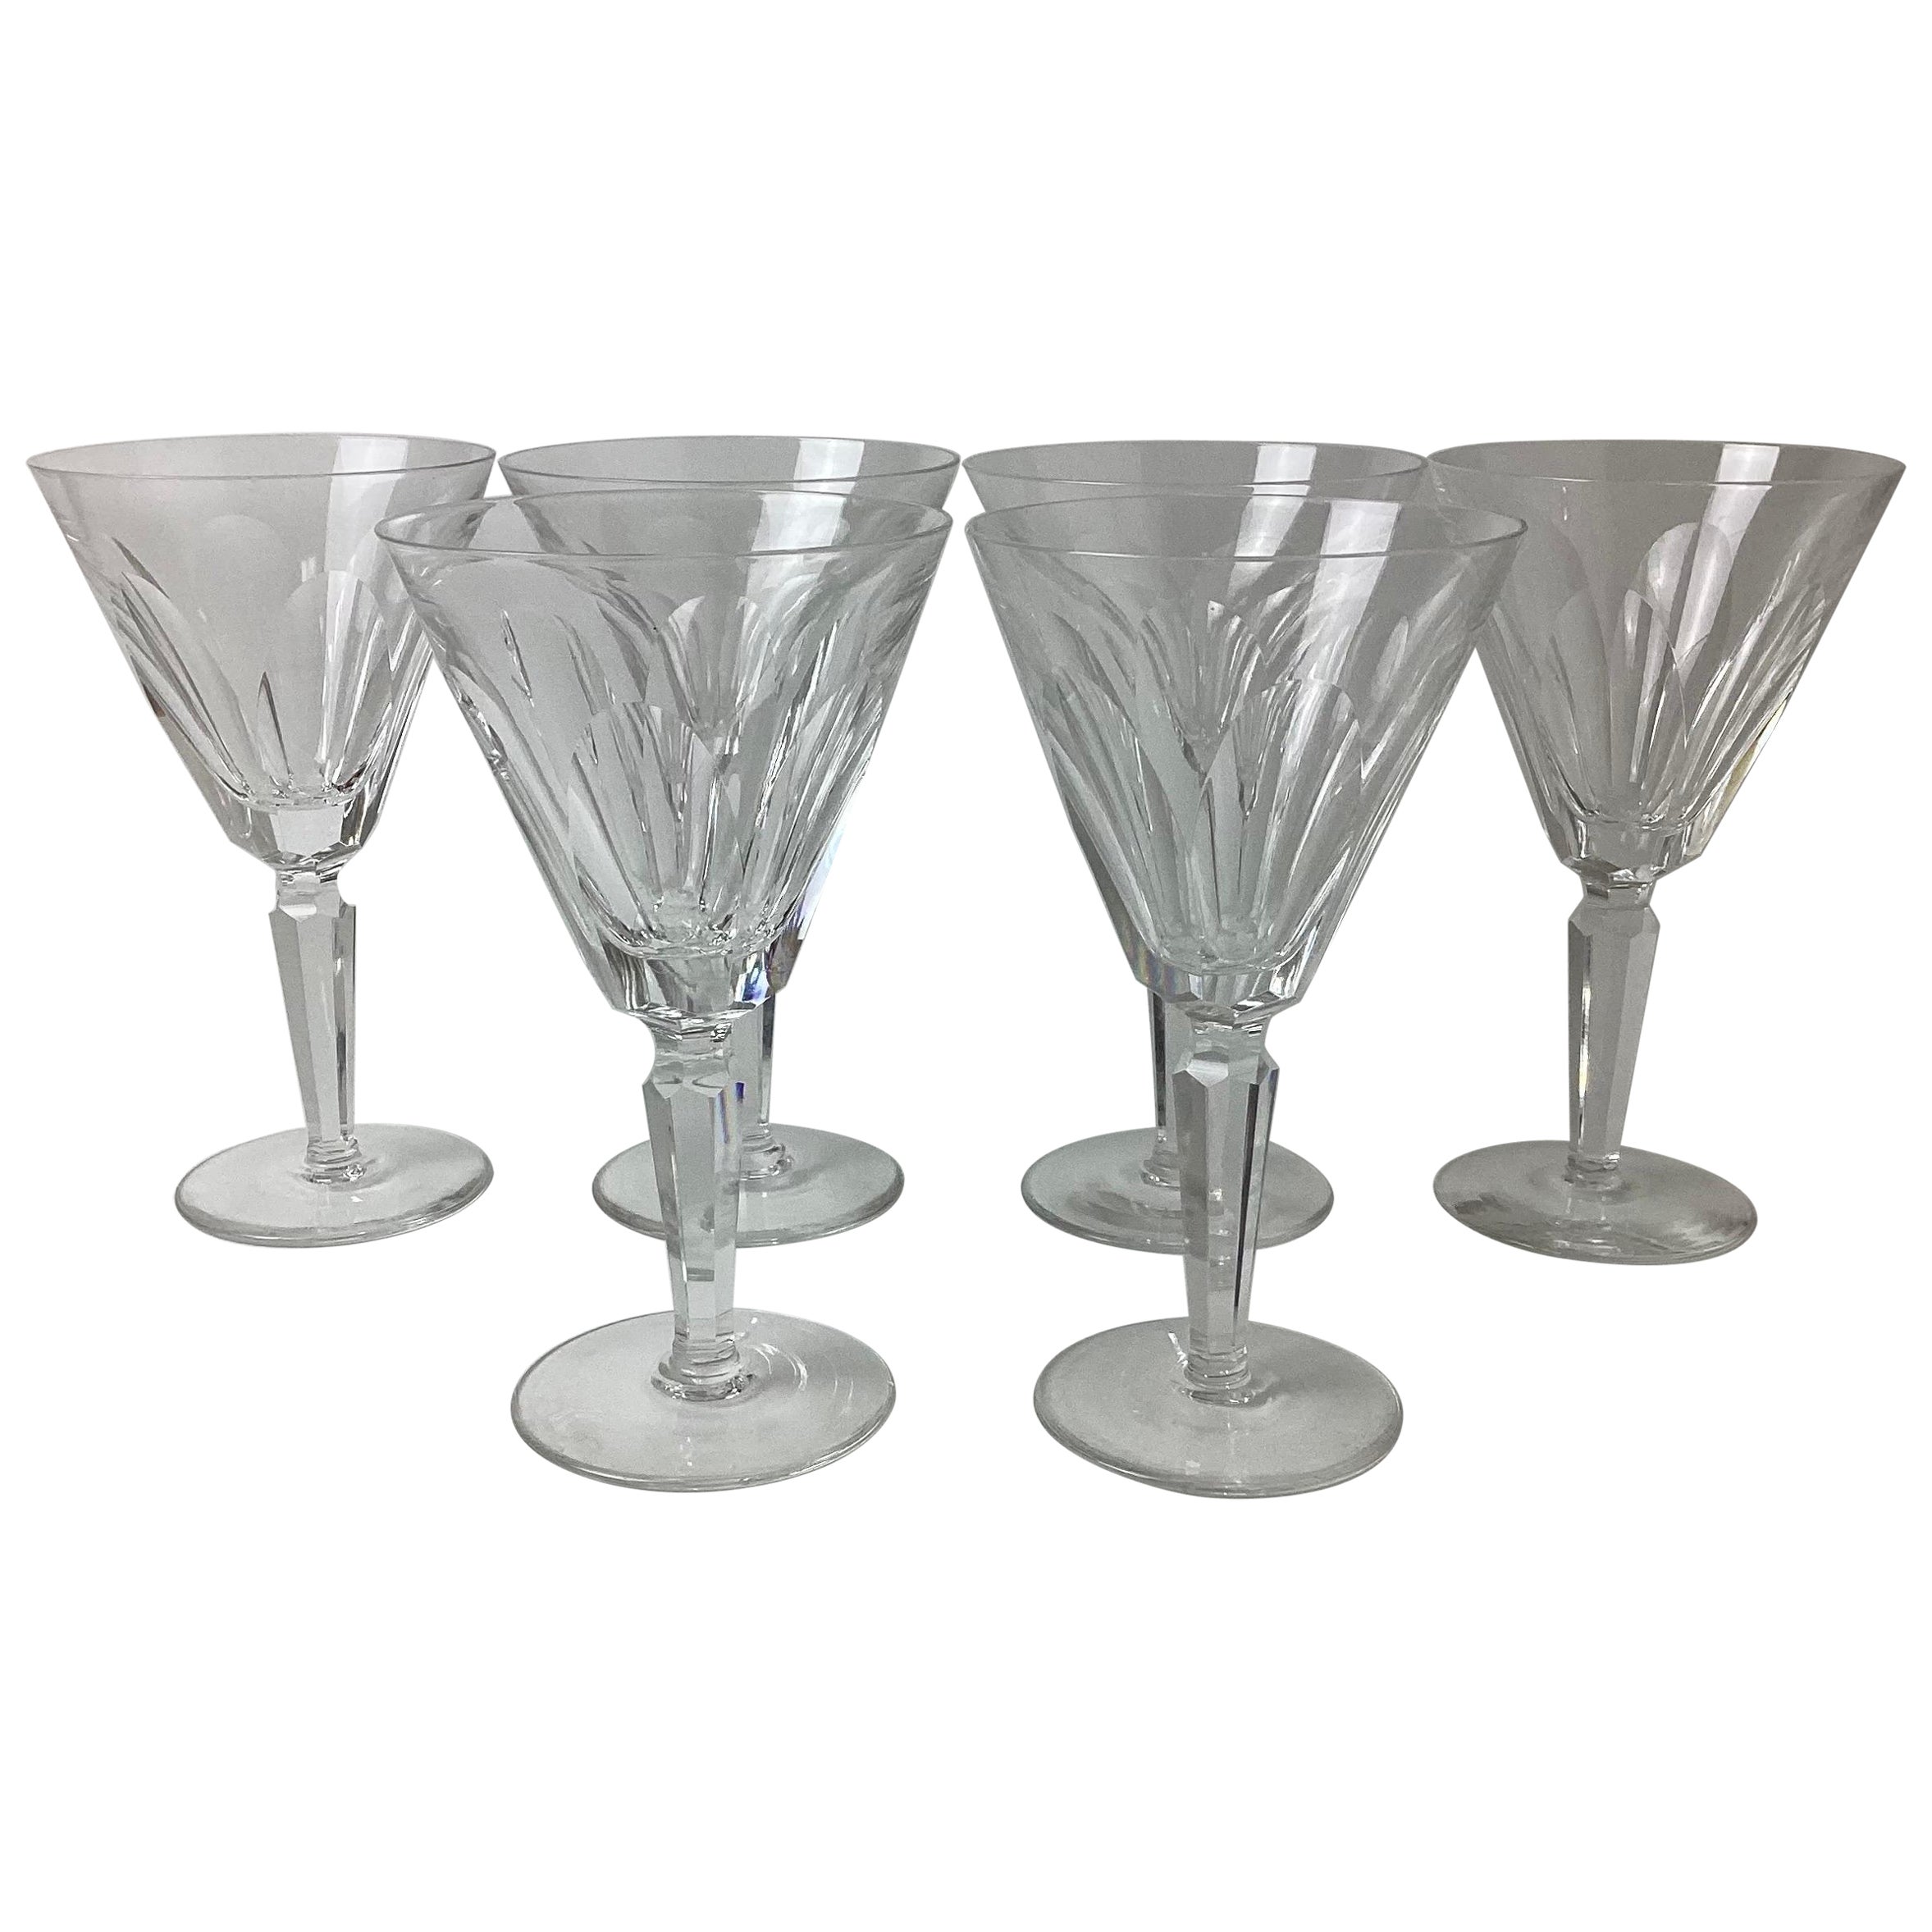 Set of 6 Waterford Sheila Cut Water Goblets